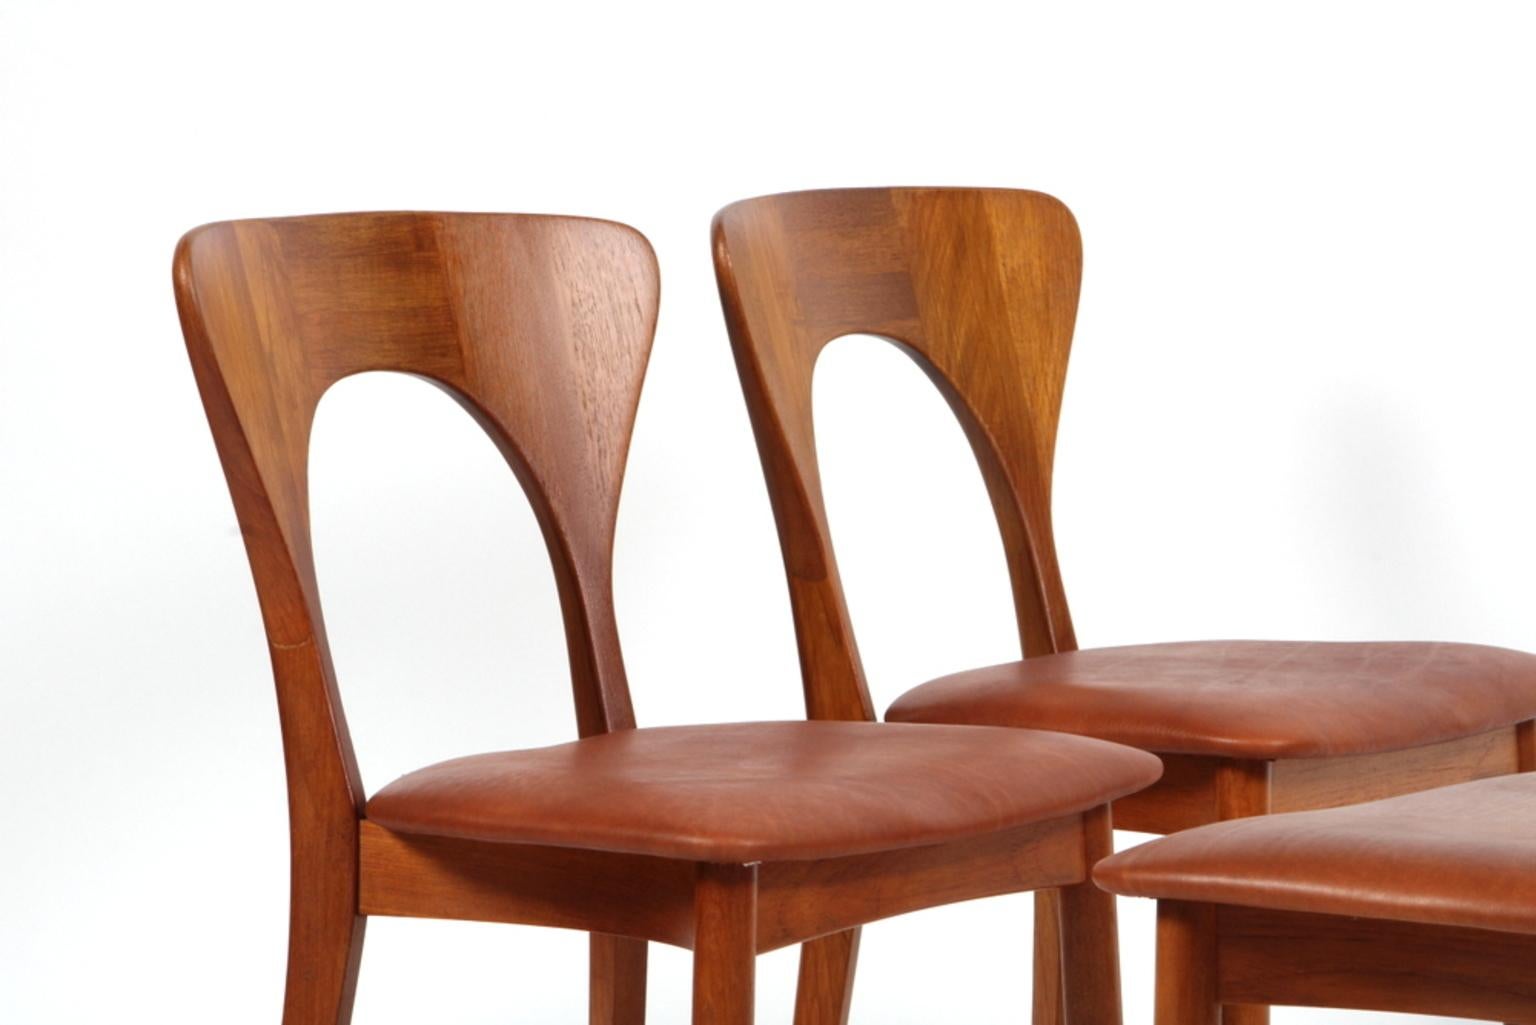 Set of four Niels Koefoed dining chairs in massive teak.

New upholstered with cognac aniline leather.

Made by Koefoeds Møbelfabrik.